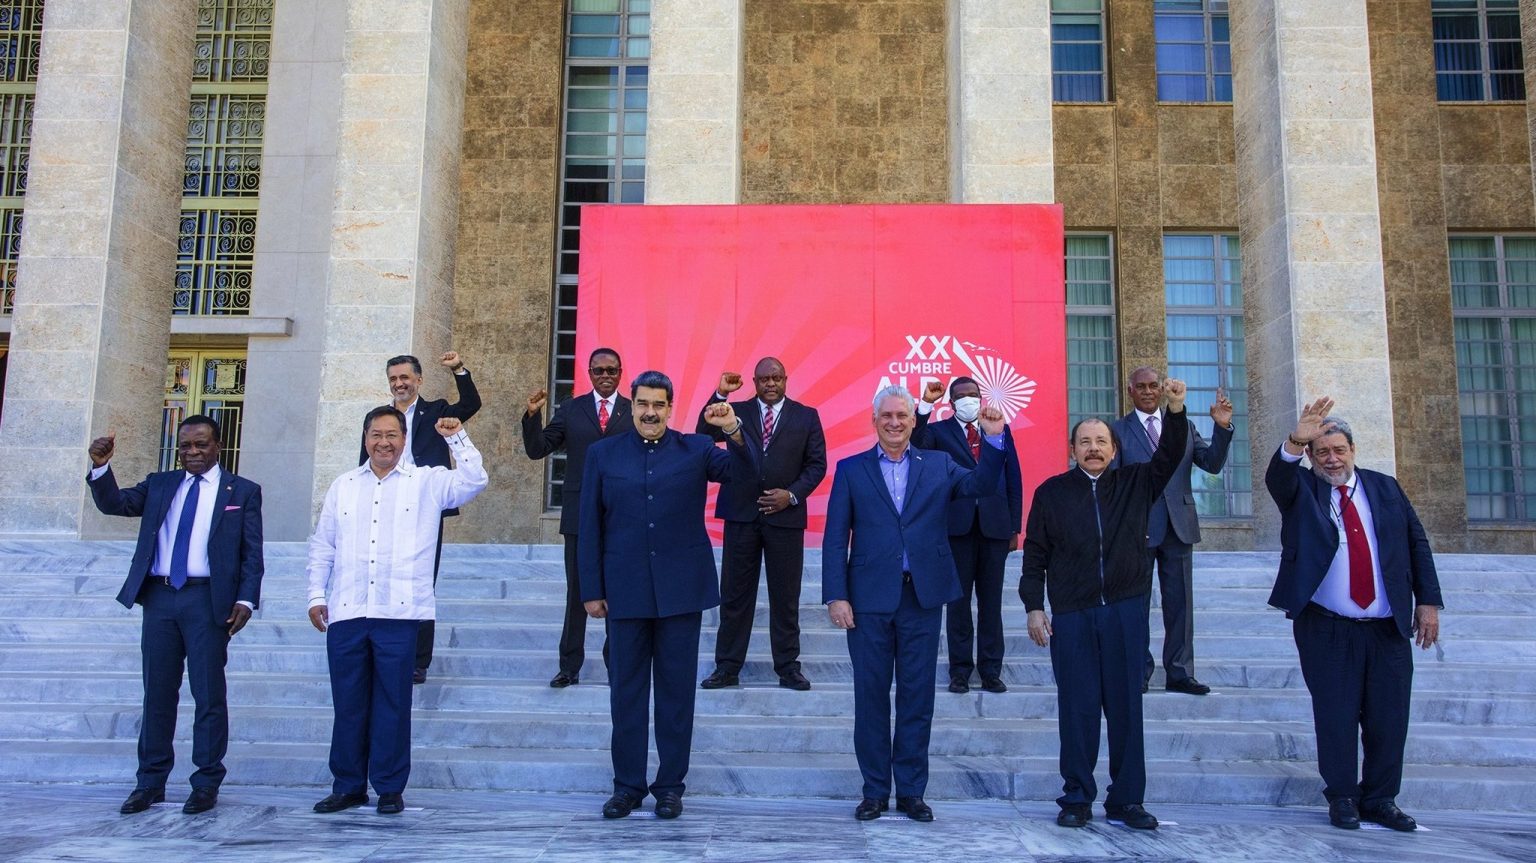 Latin American leaders at the 20th summit of the Bolivarian Alliance for the Peoples of Our America – Peoples’ Trade Treaty (ALBA-TCP). Photo: Bruno Rodríguez on Twitter.